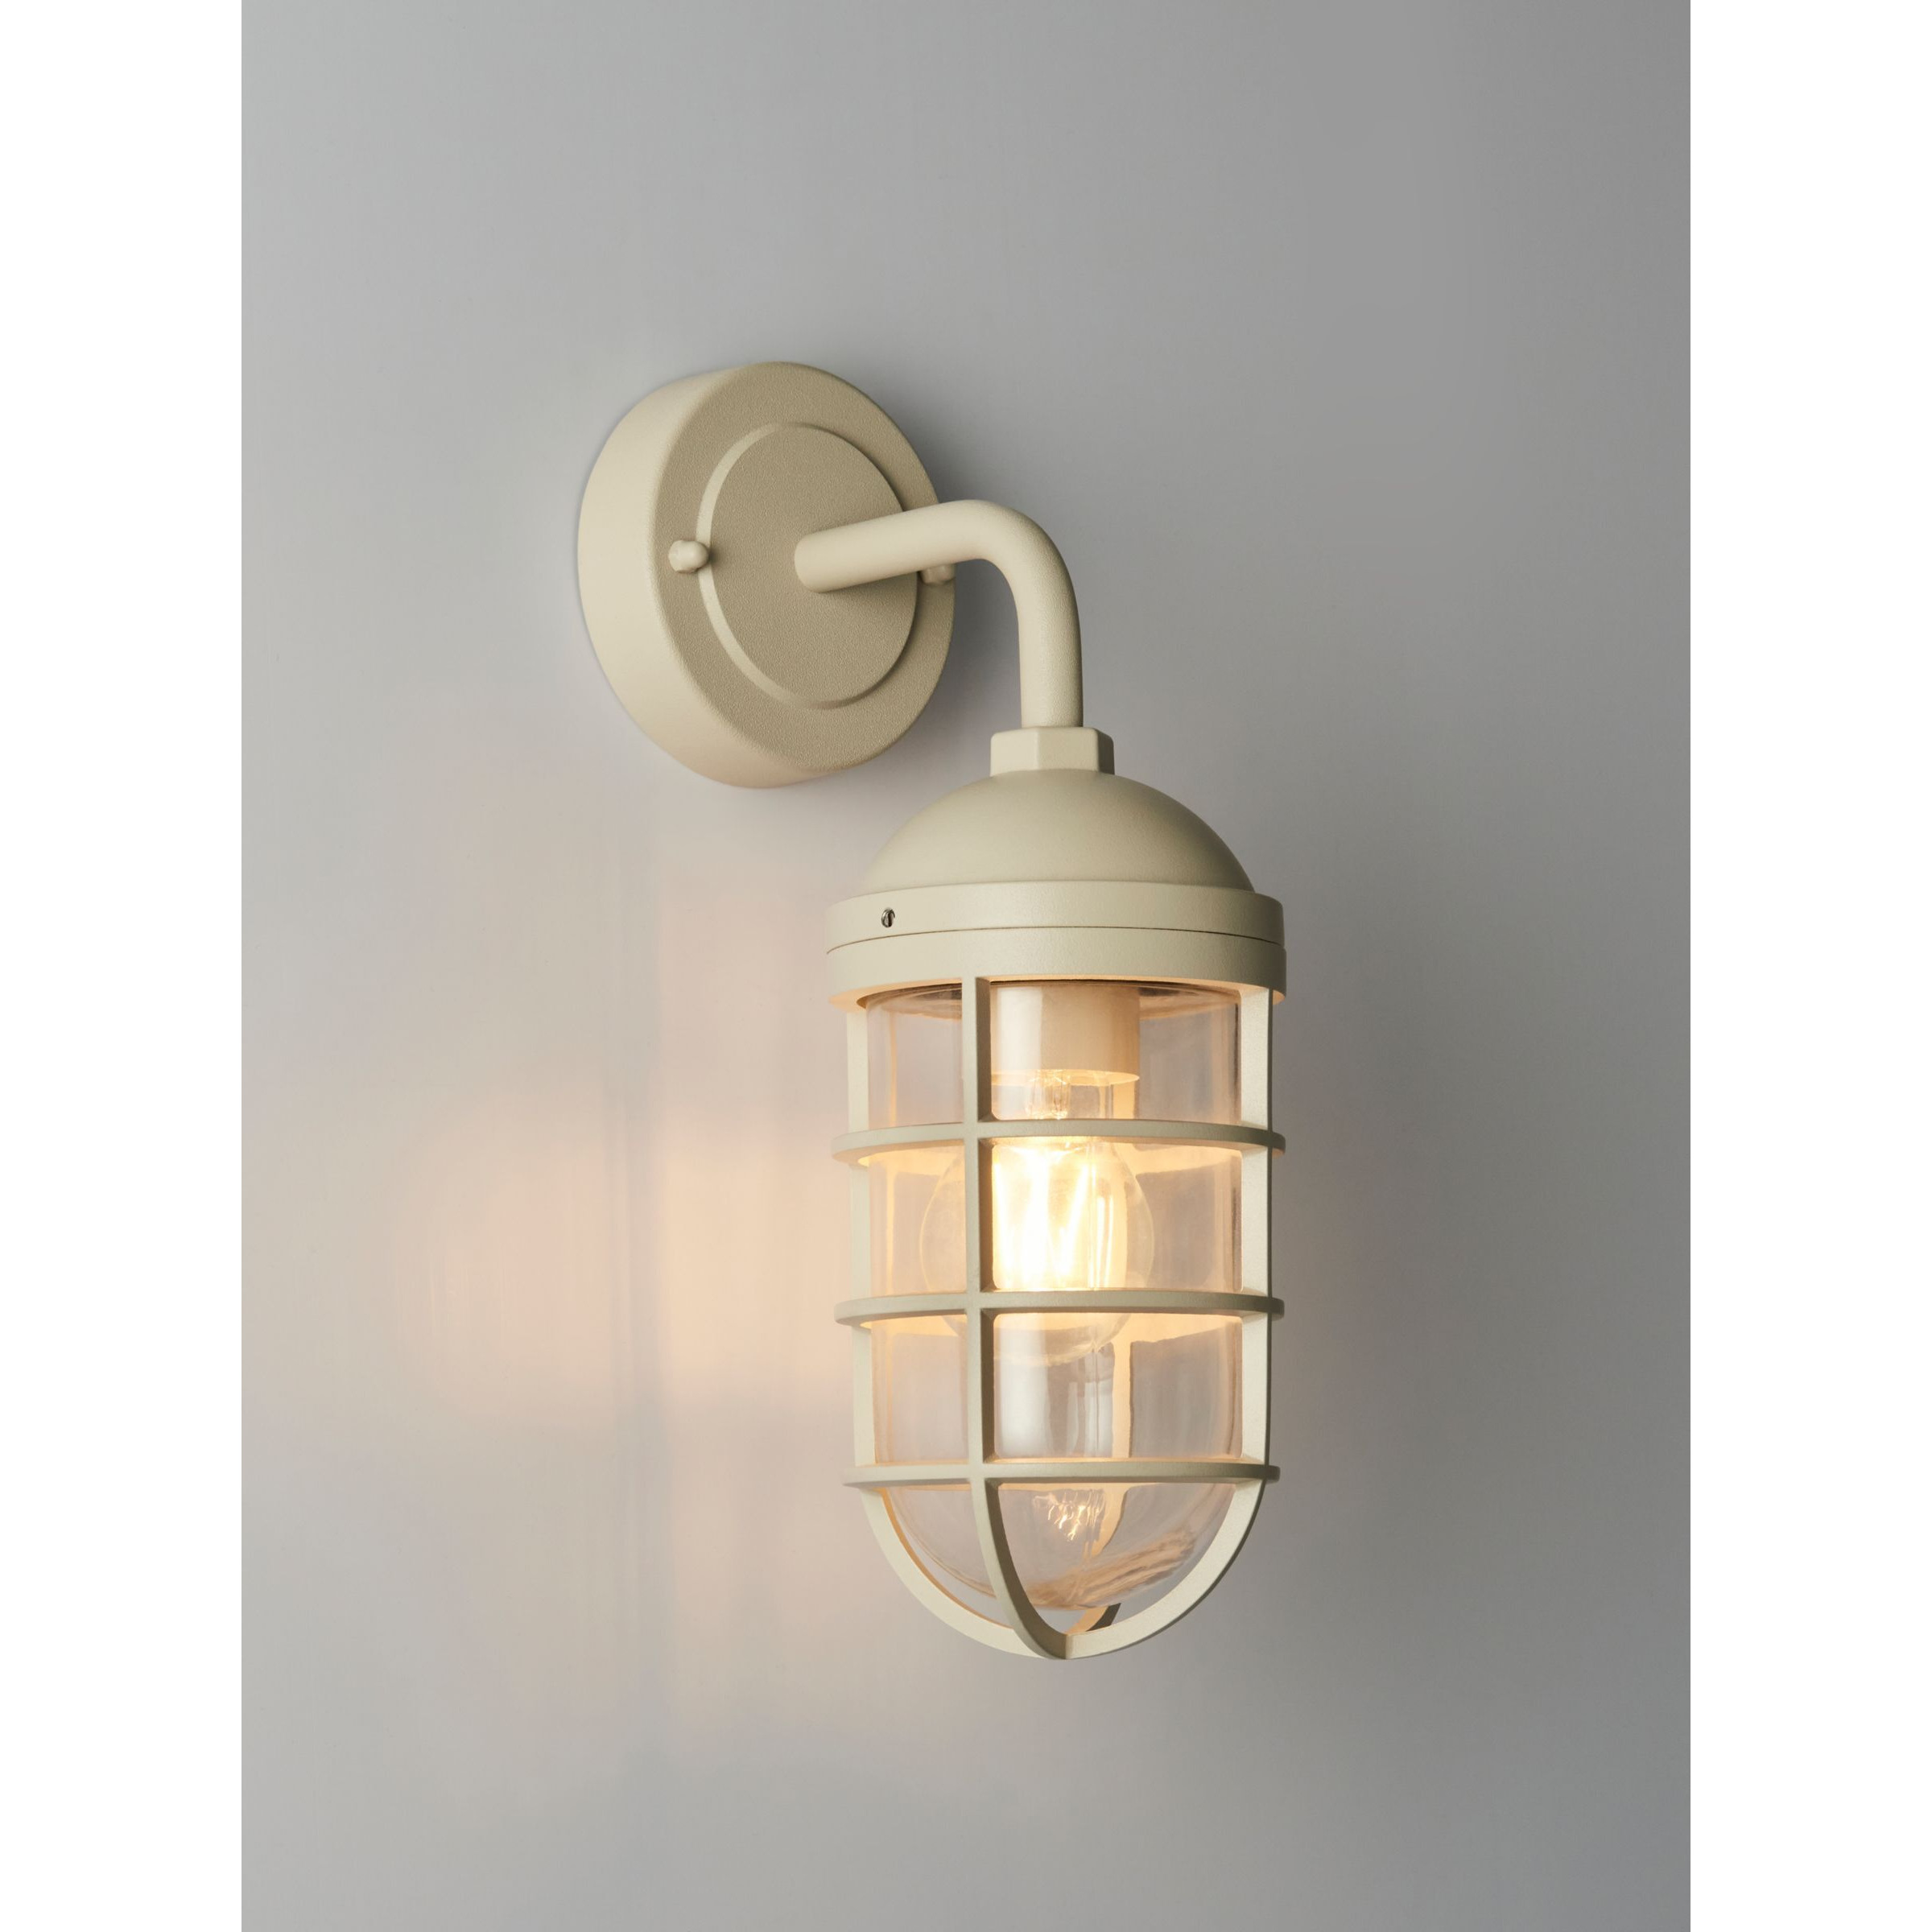 John Lewis Mission Outdoor Wall Light - image 1